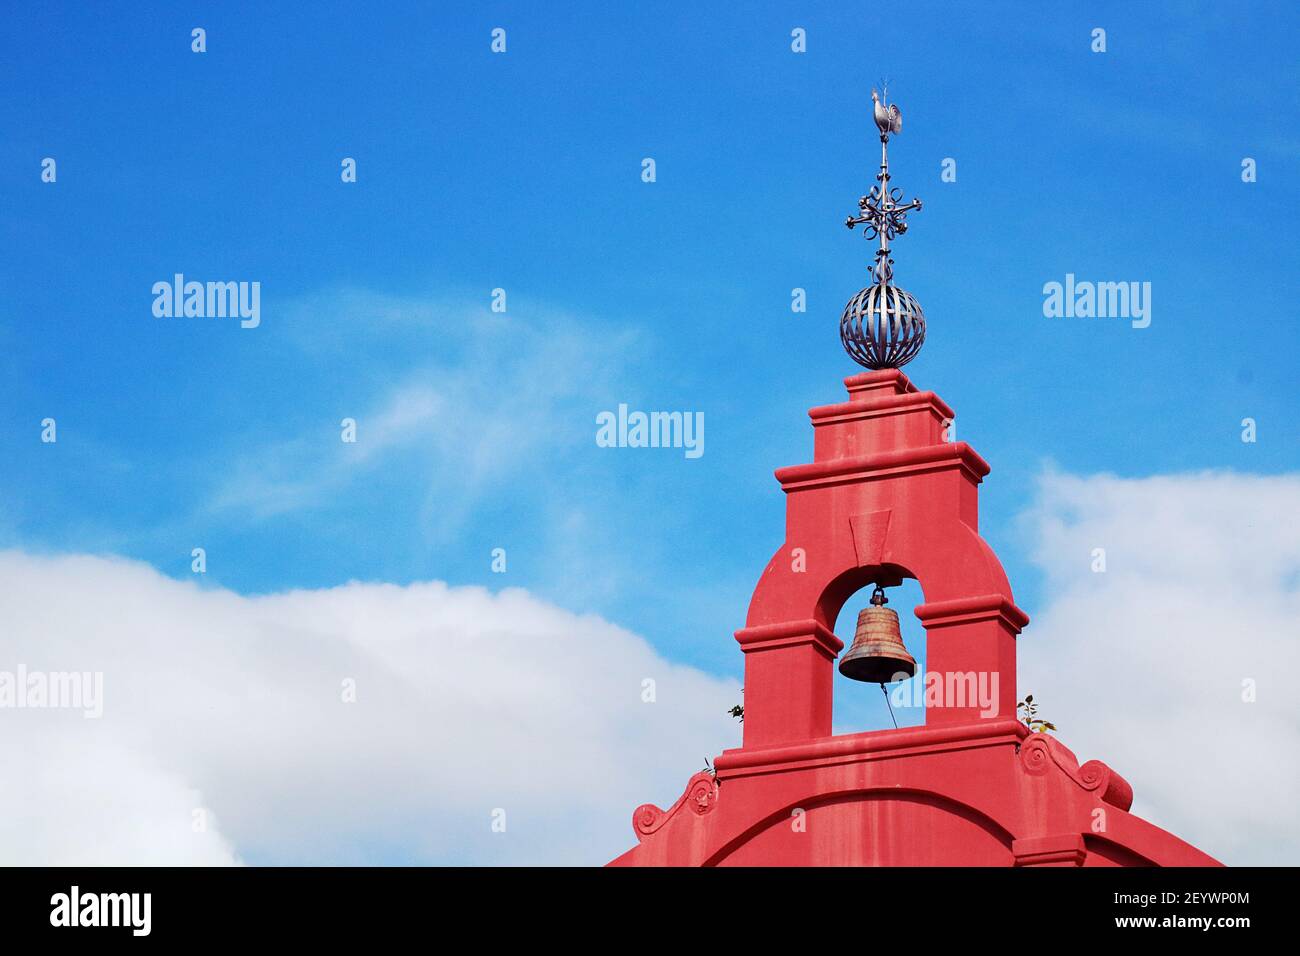 Metal Wind Vane with rooster ornament on top of a church bell tower Stock Photo